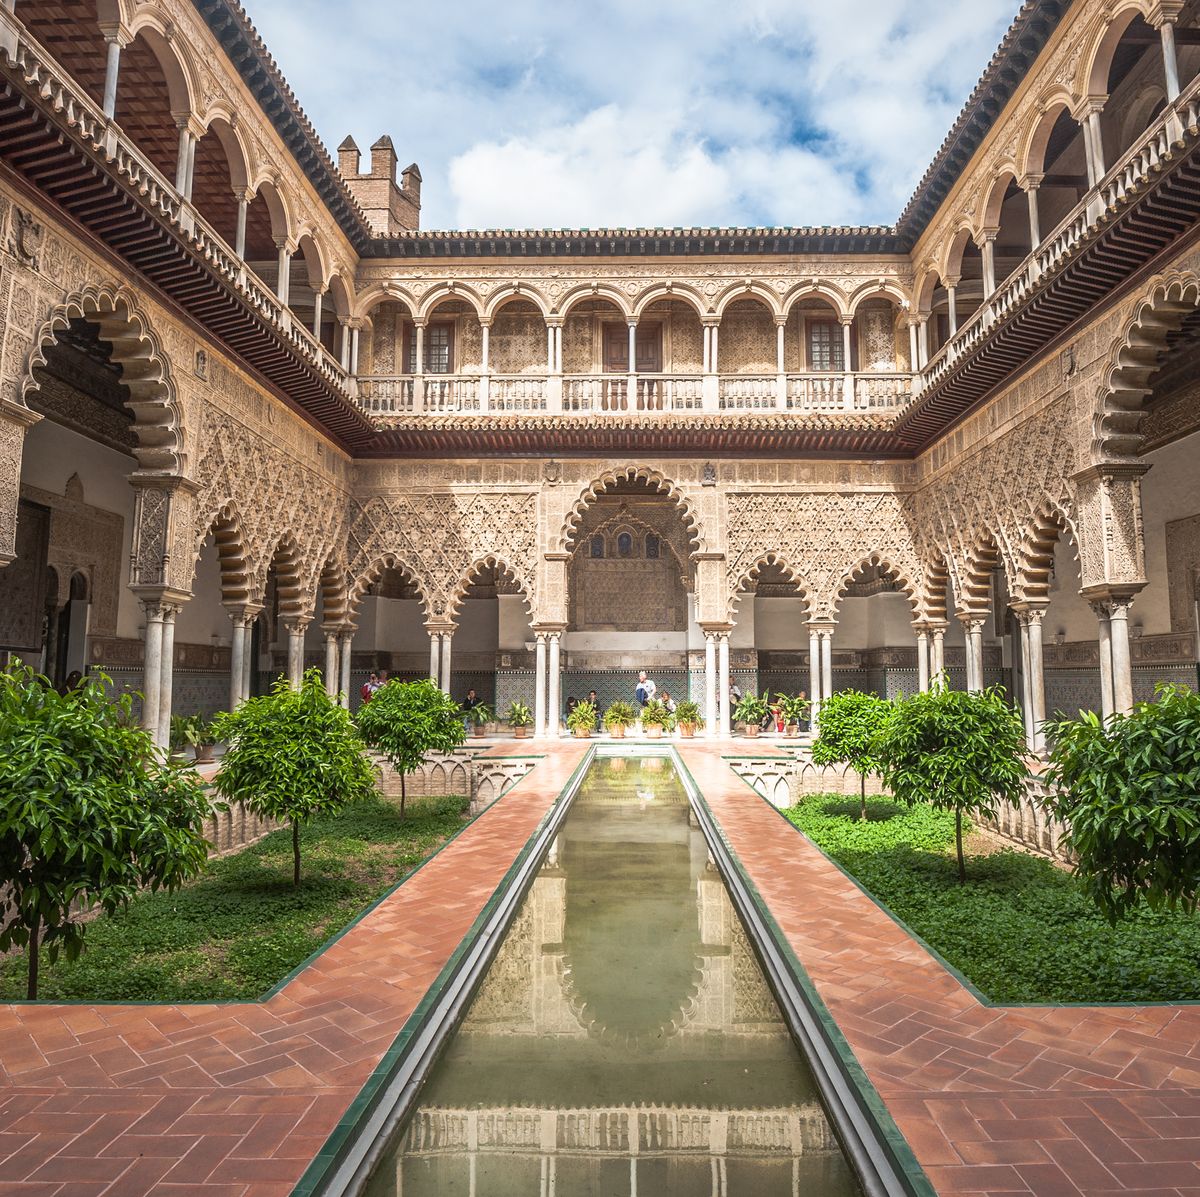 patio-in-royal-alcazars-of-seville-spain-royalty-free-image-1617334366.